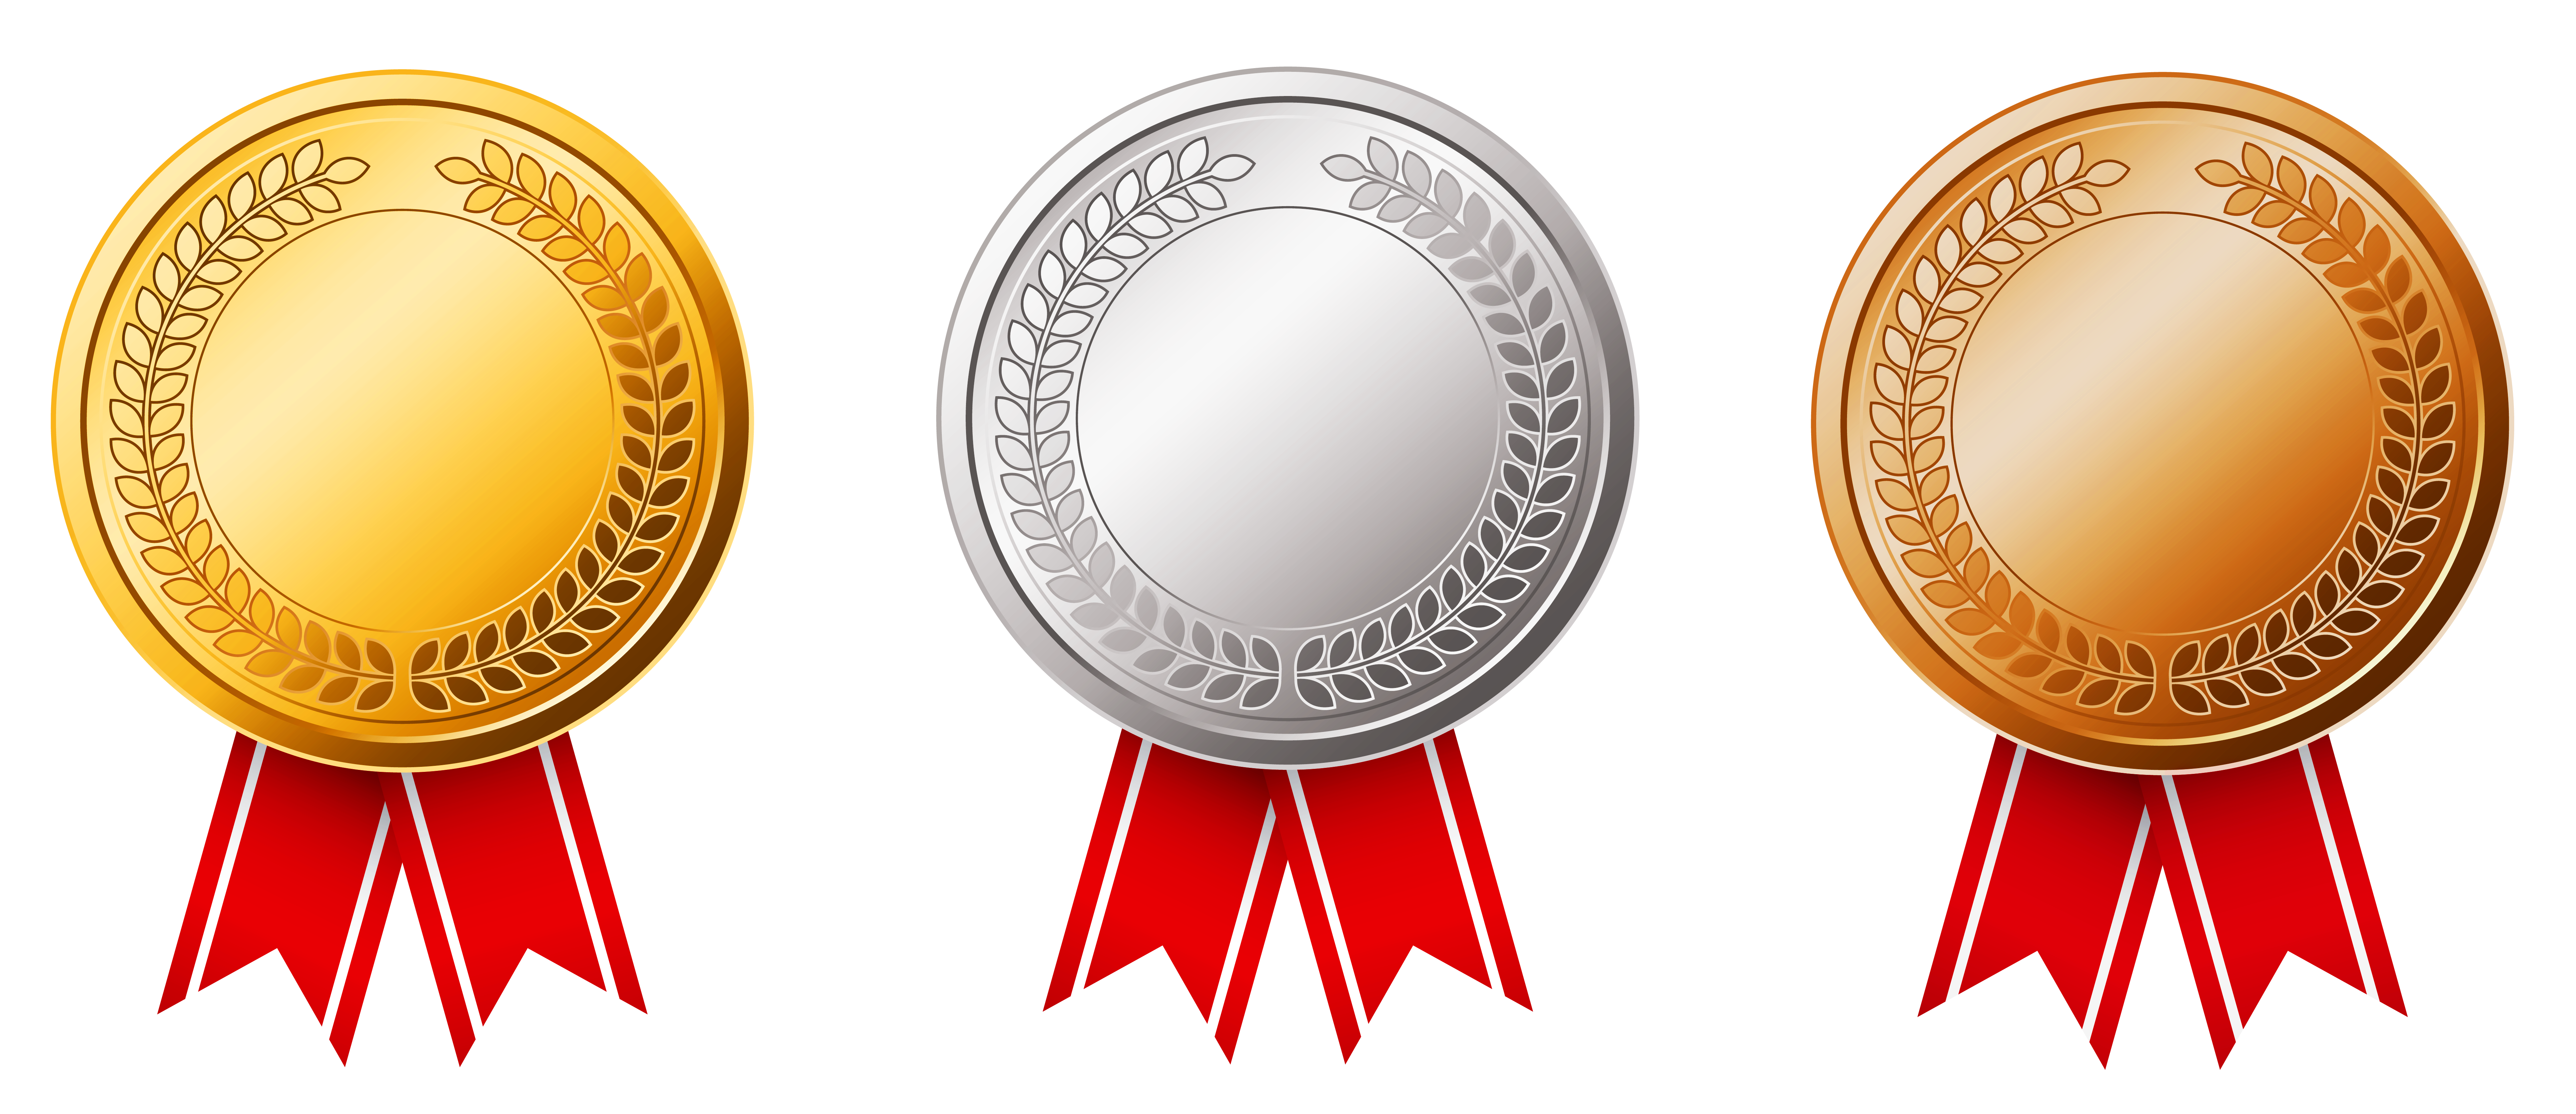 medal clipart silver